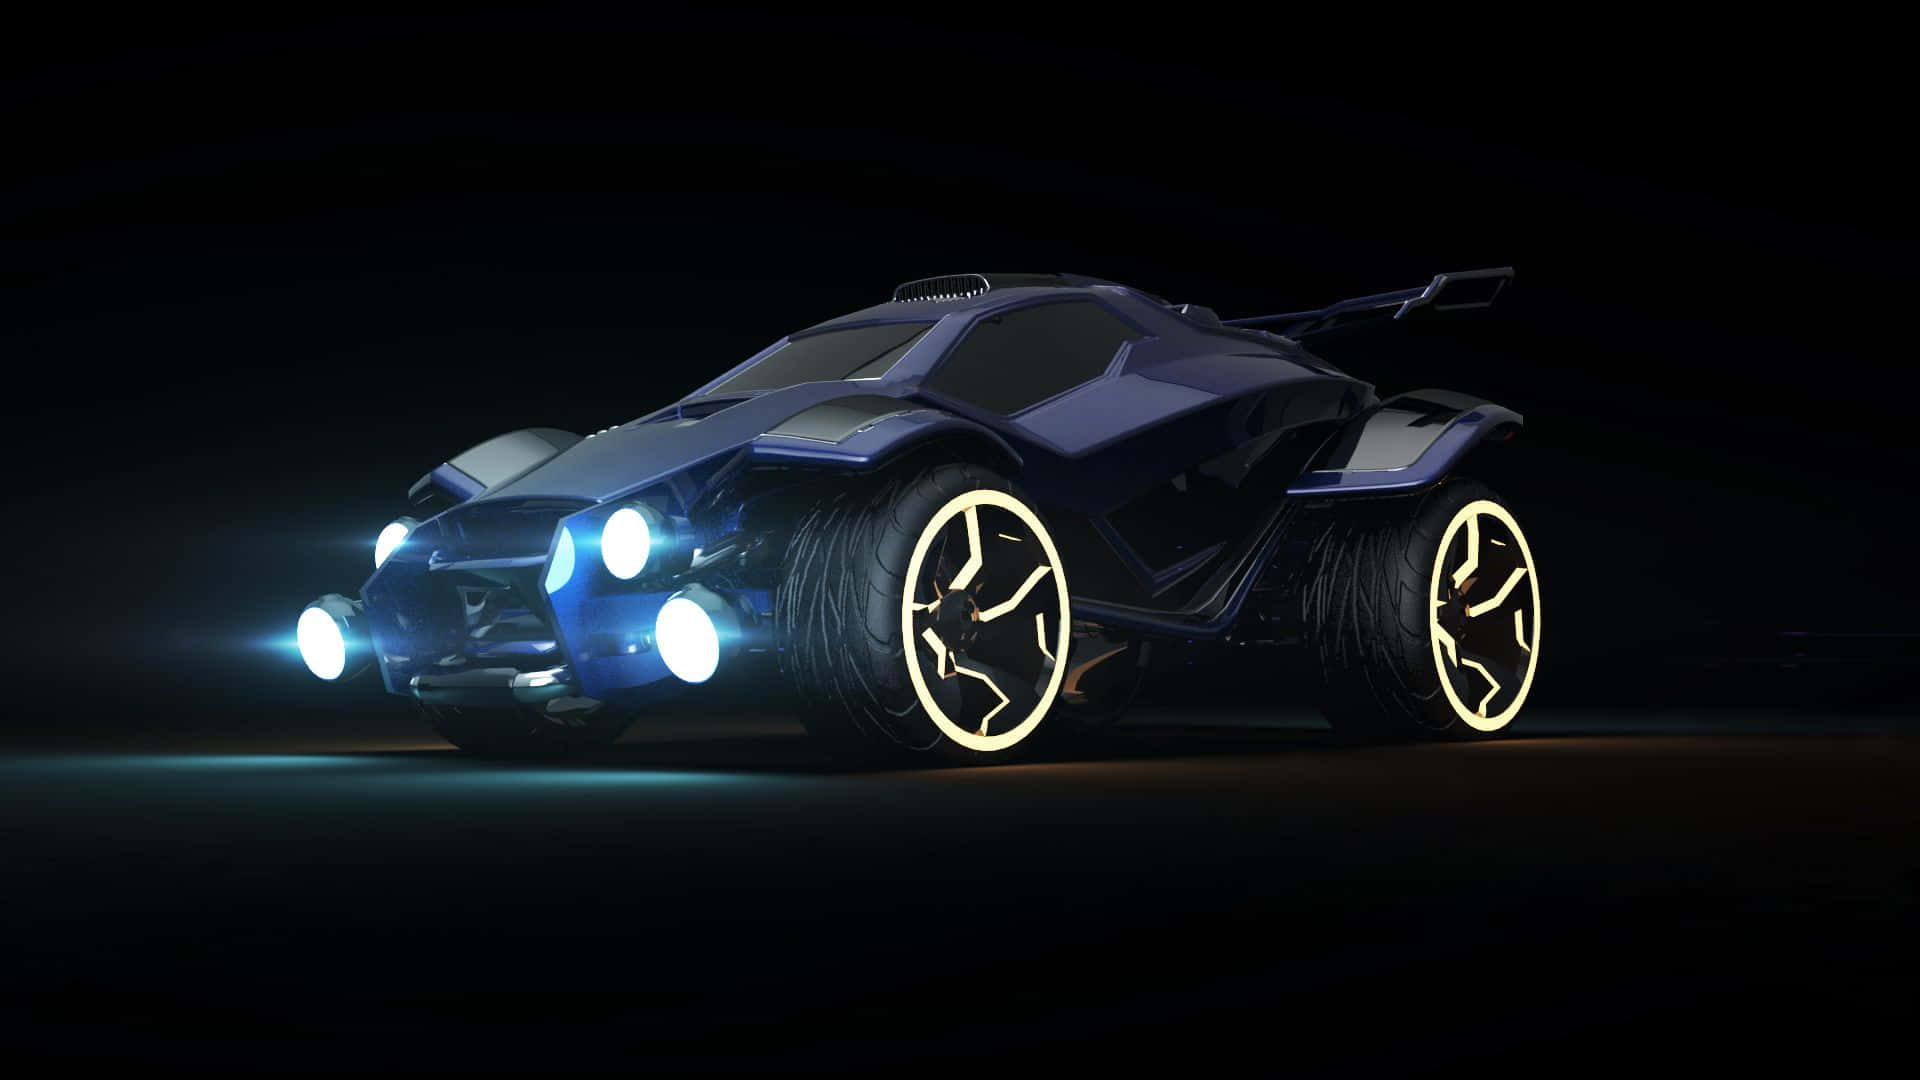 A Blue Car With Lights On It In The Dark